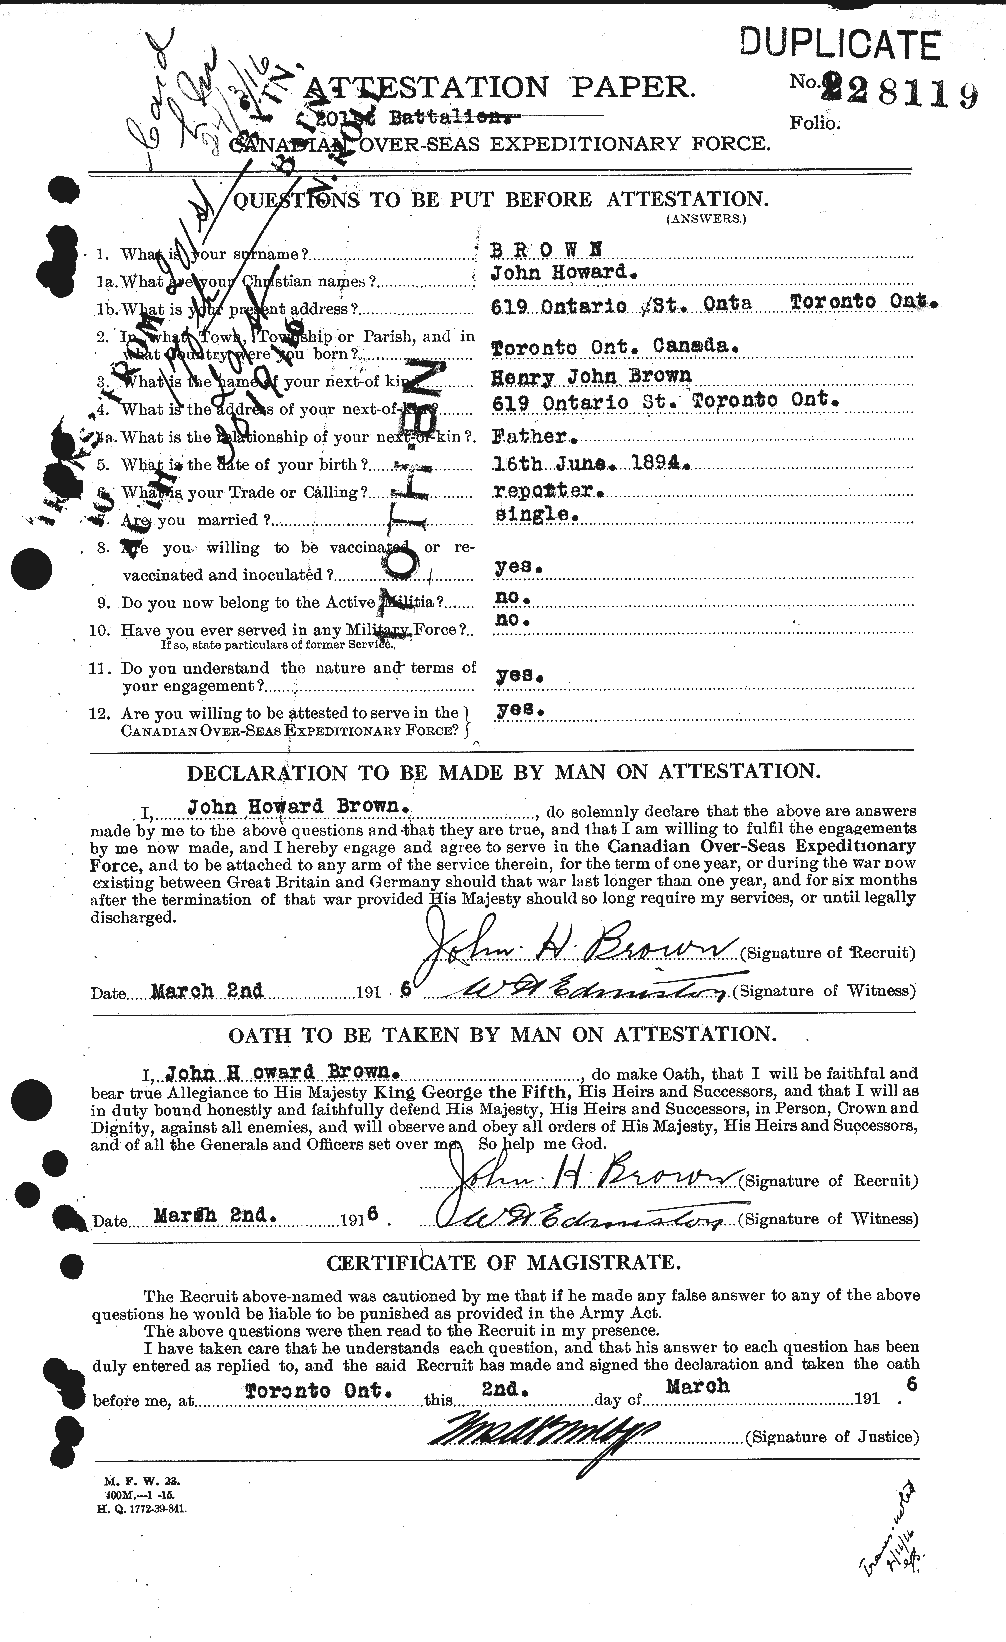 Personnel Records of the First World War - CEF 264625a